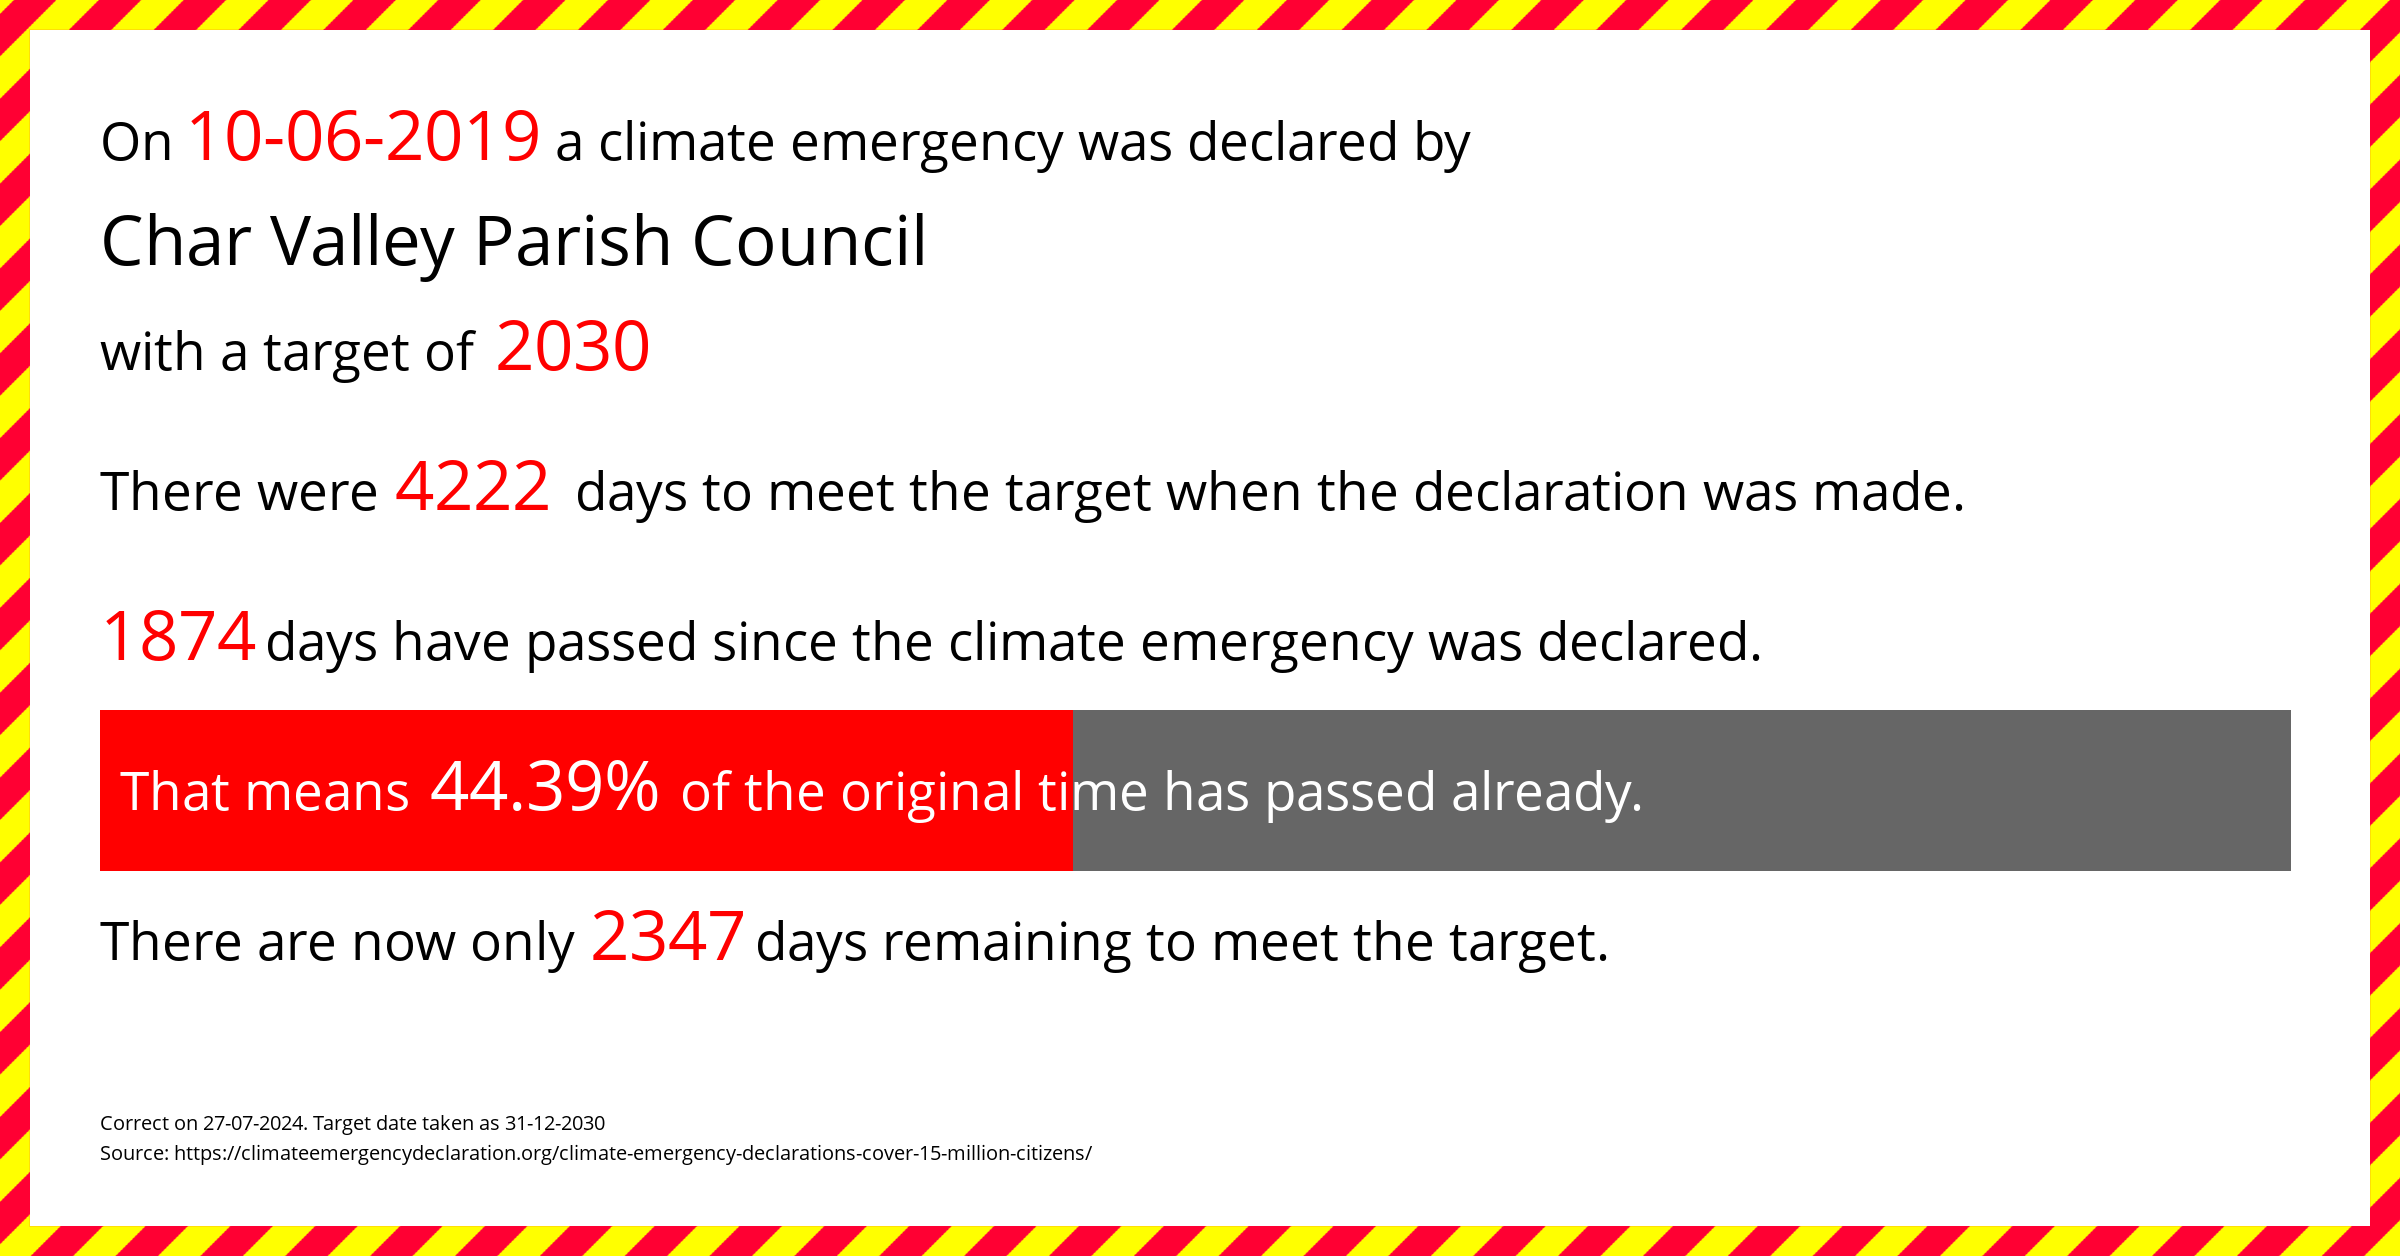 Char Valley Parish Council  declared a Climate emergency on Monday 10th June 2019, with a target of 2030.